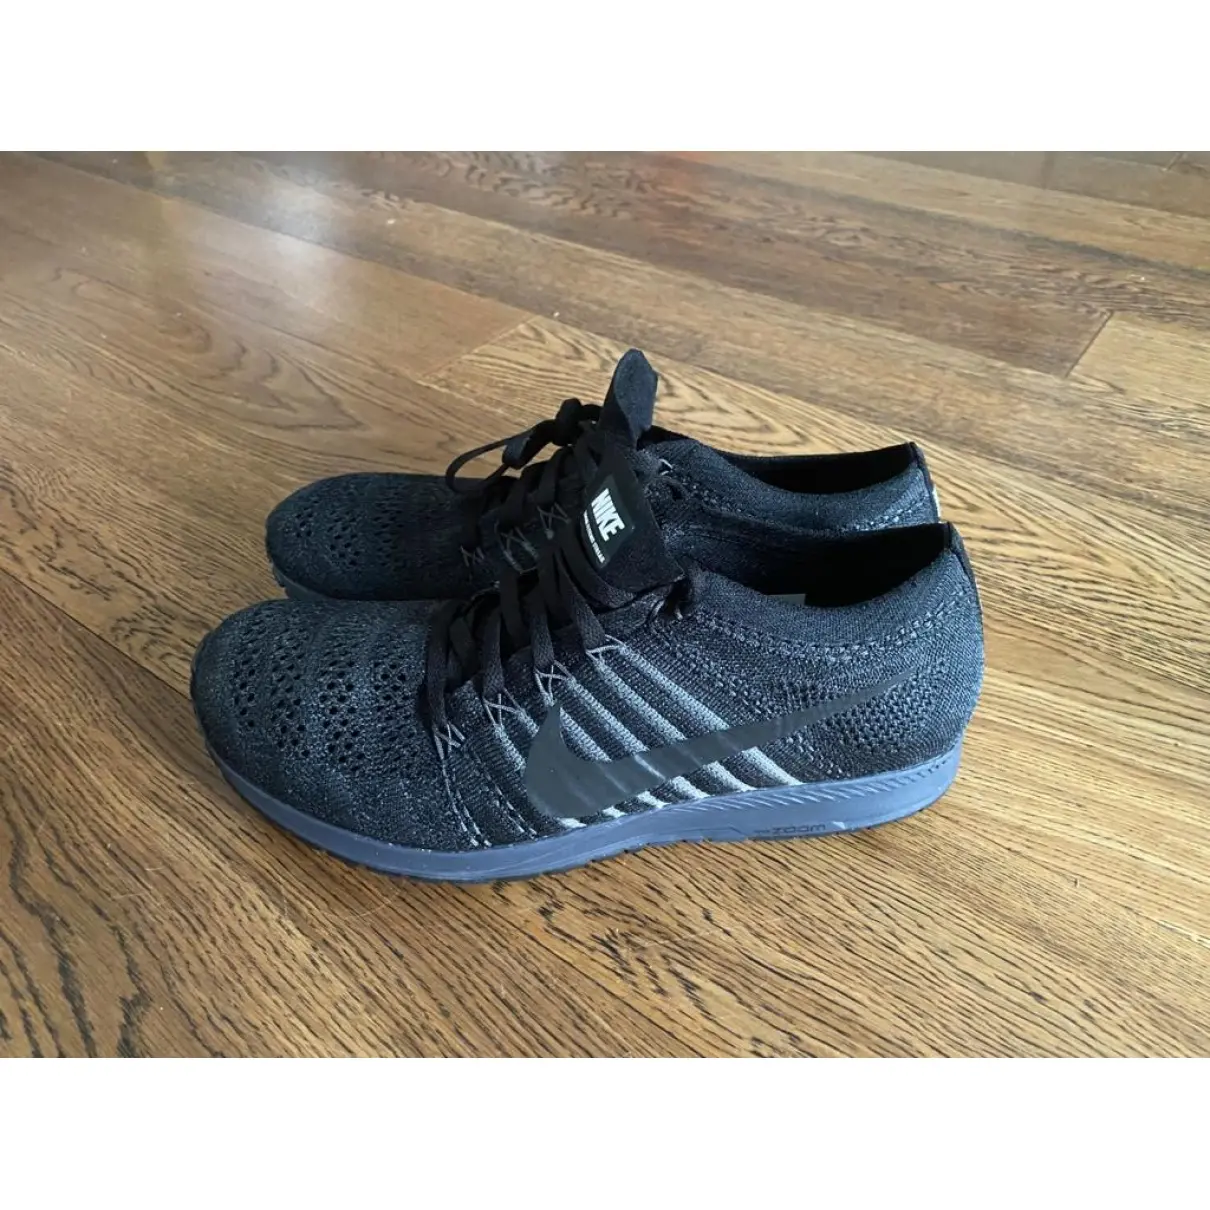 Nike Low trainers for sale